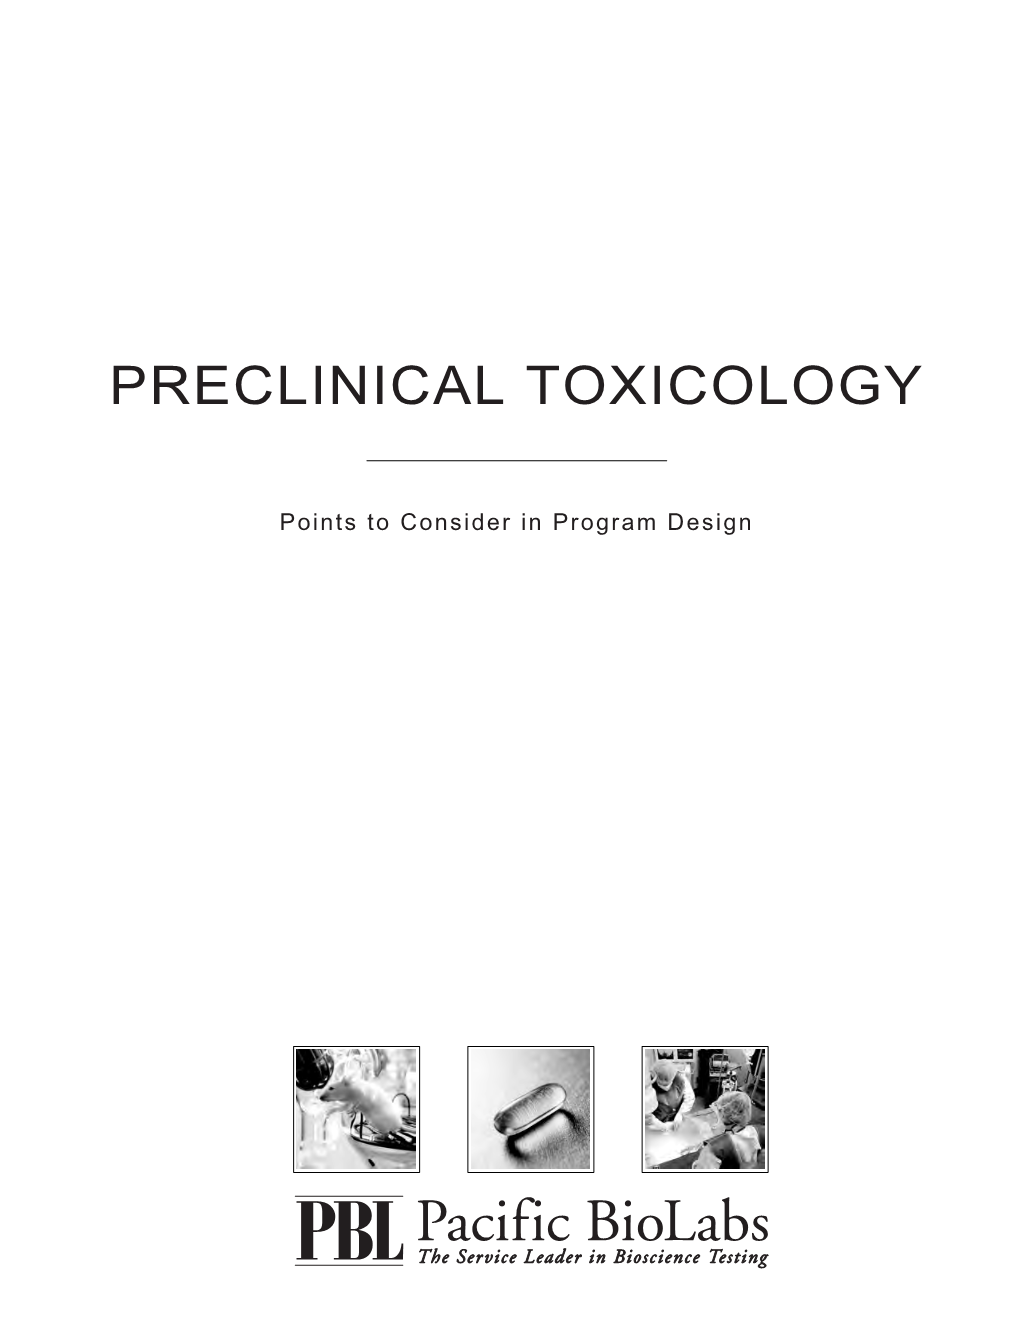 Preclinical Toxicology – Points to Consider in Program Design